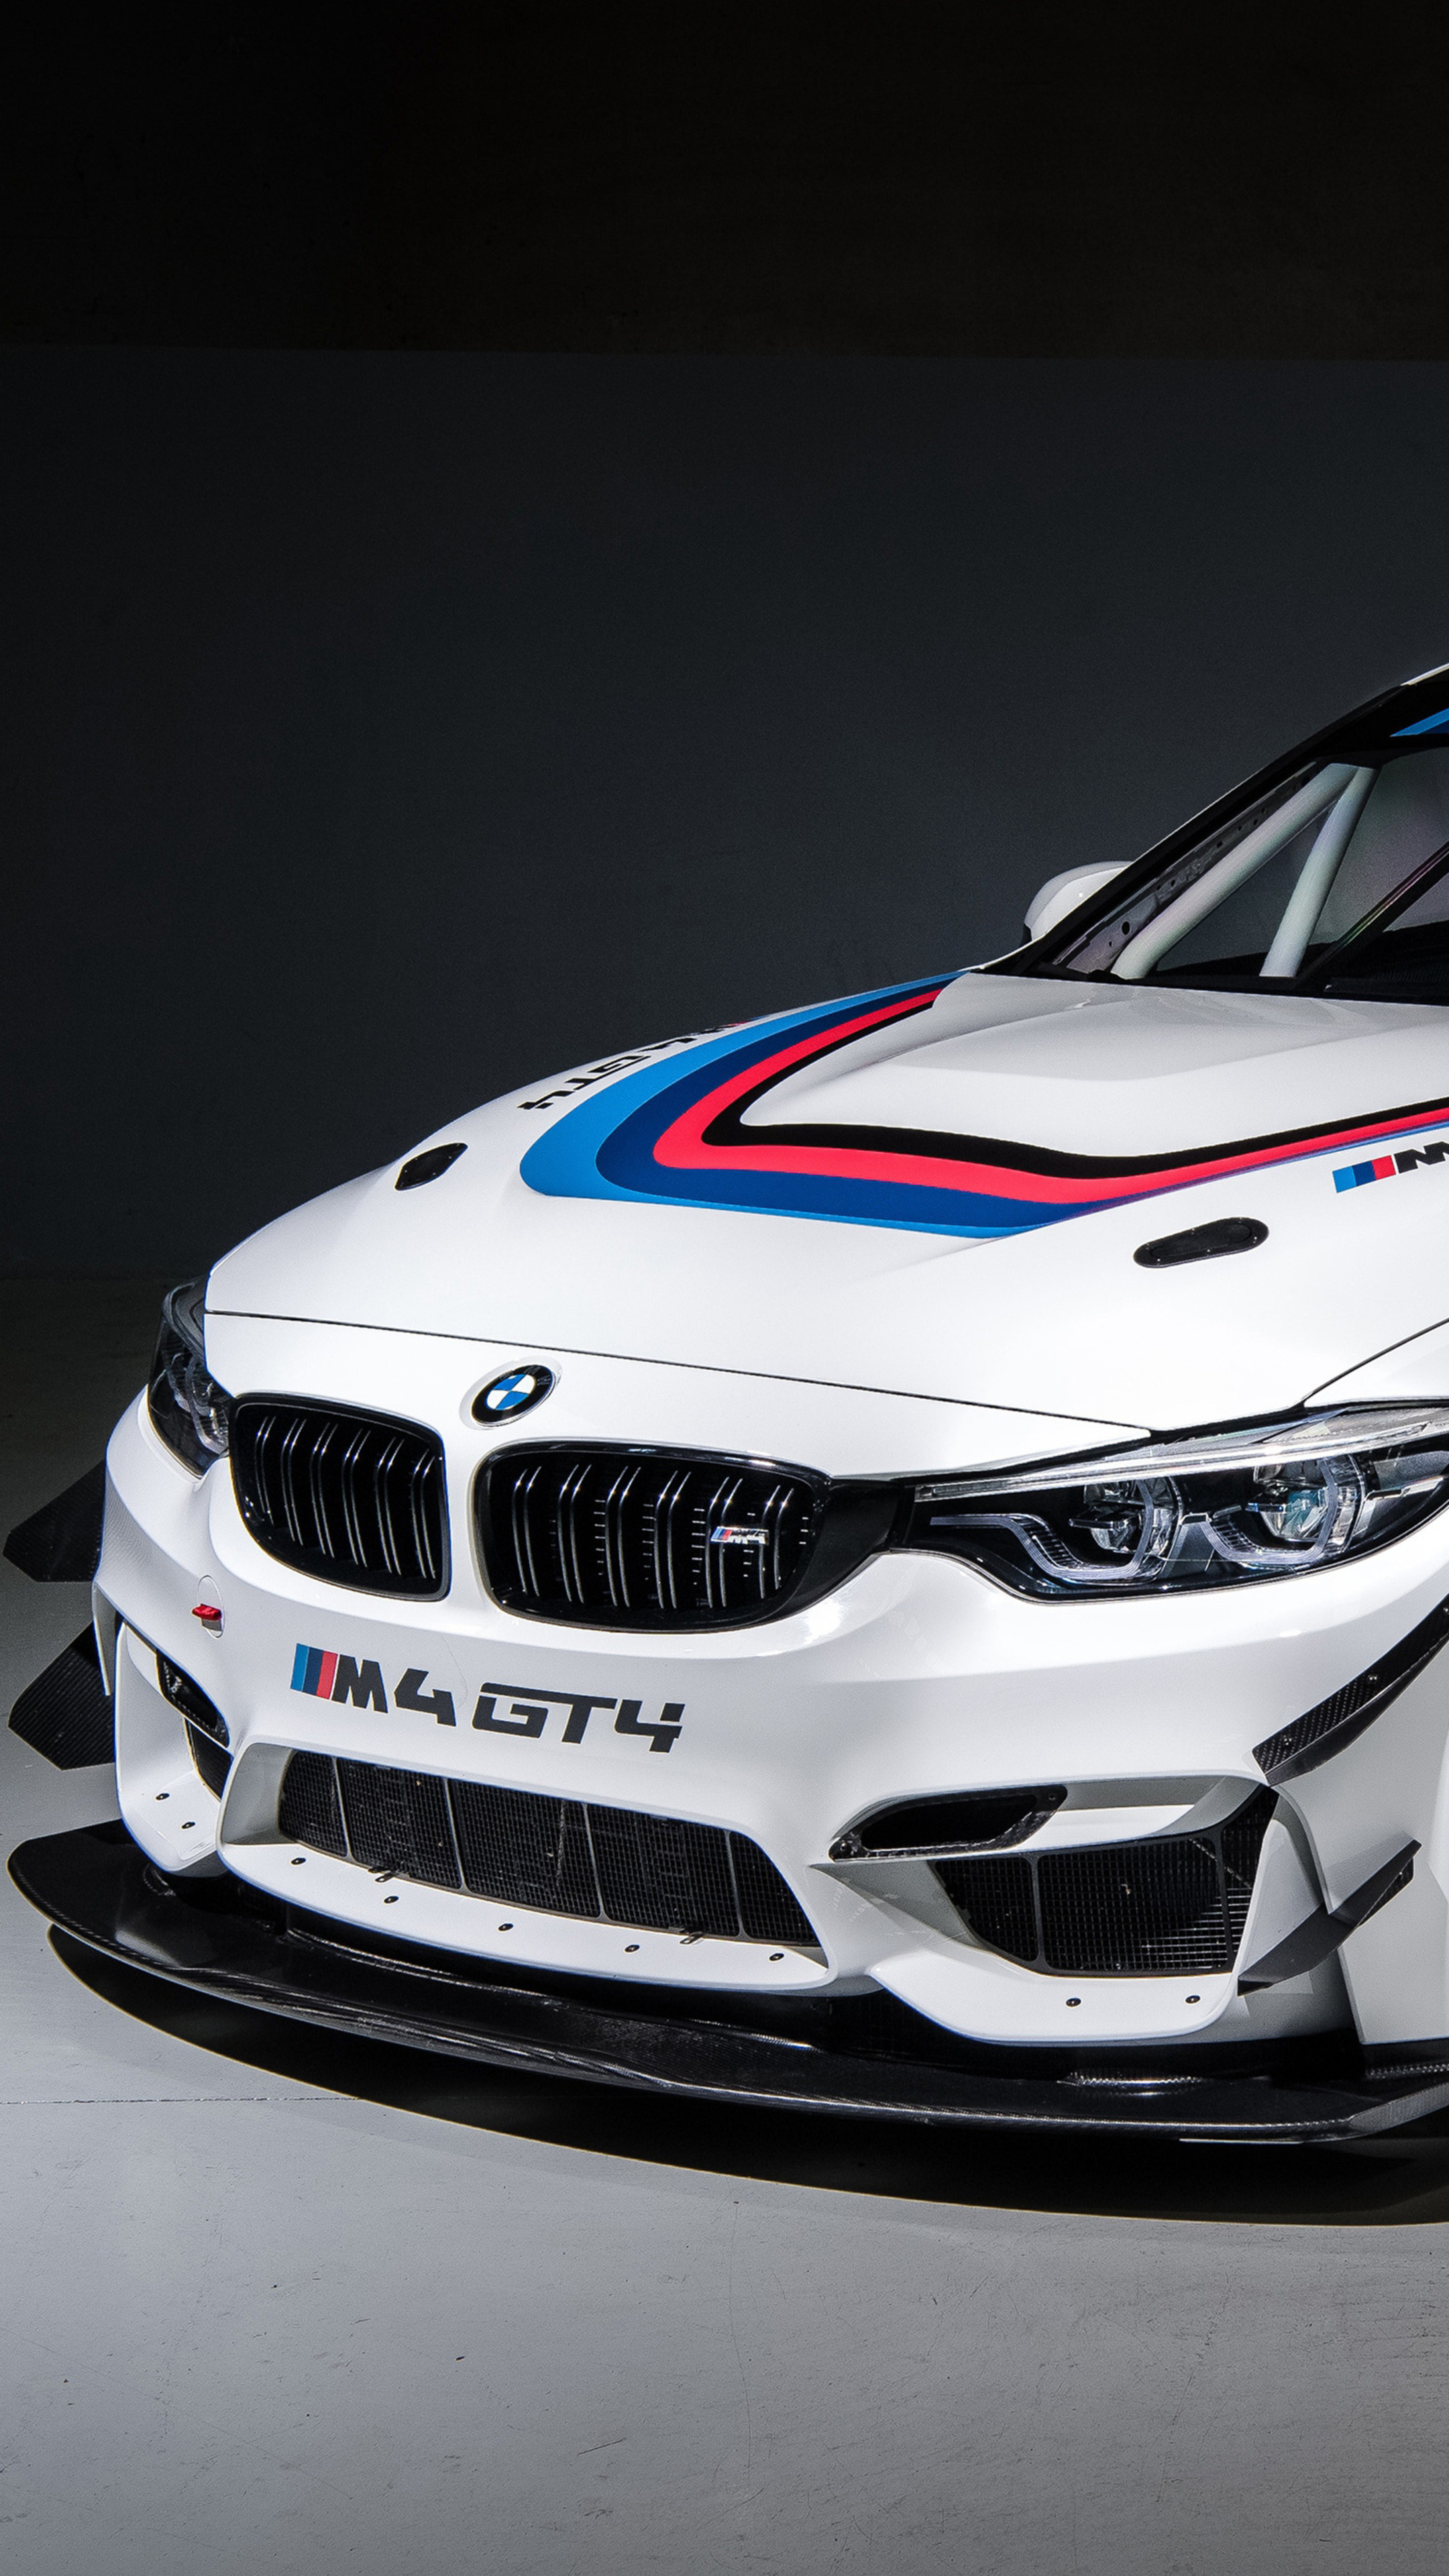 BMW M4 GT4, Sony Xperia X, HD wallpapers, Images, 2160x3840 4K Handy